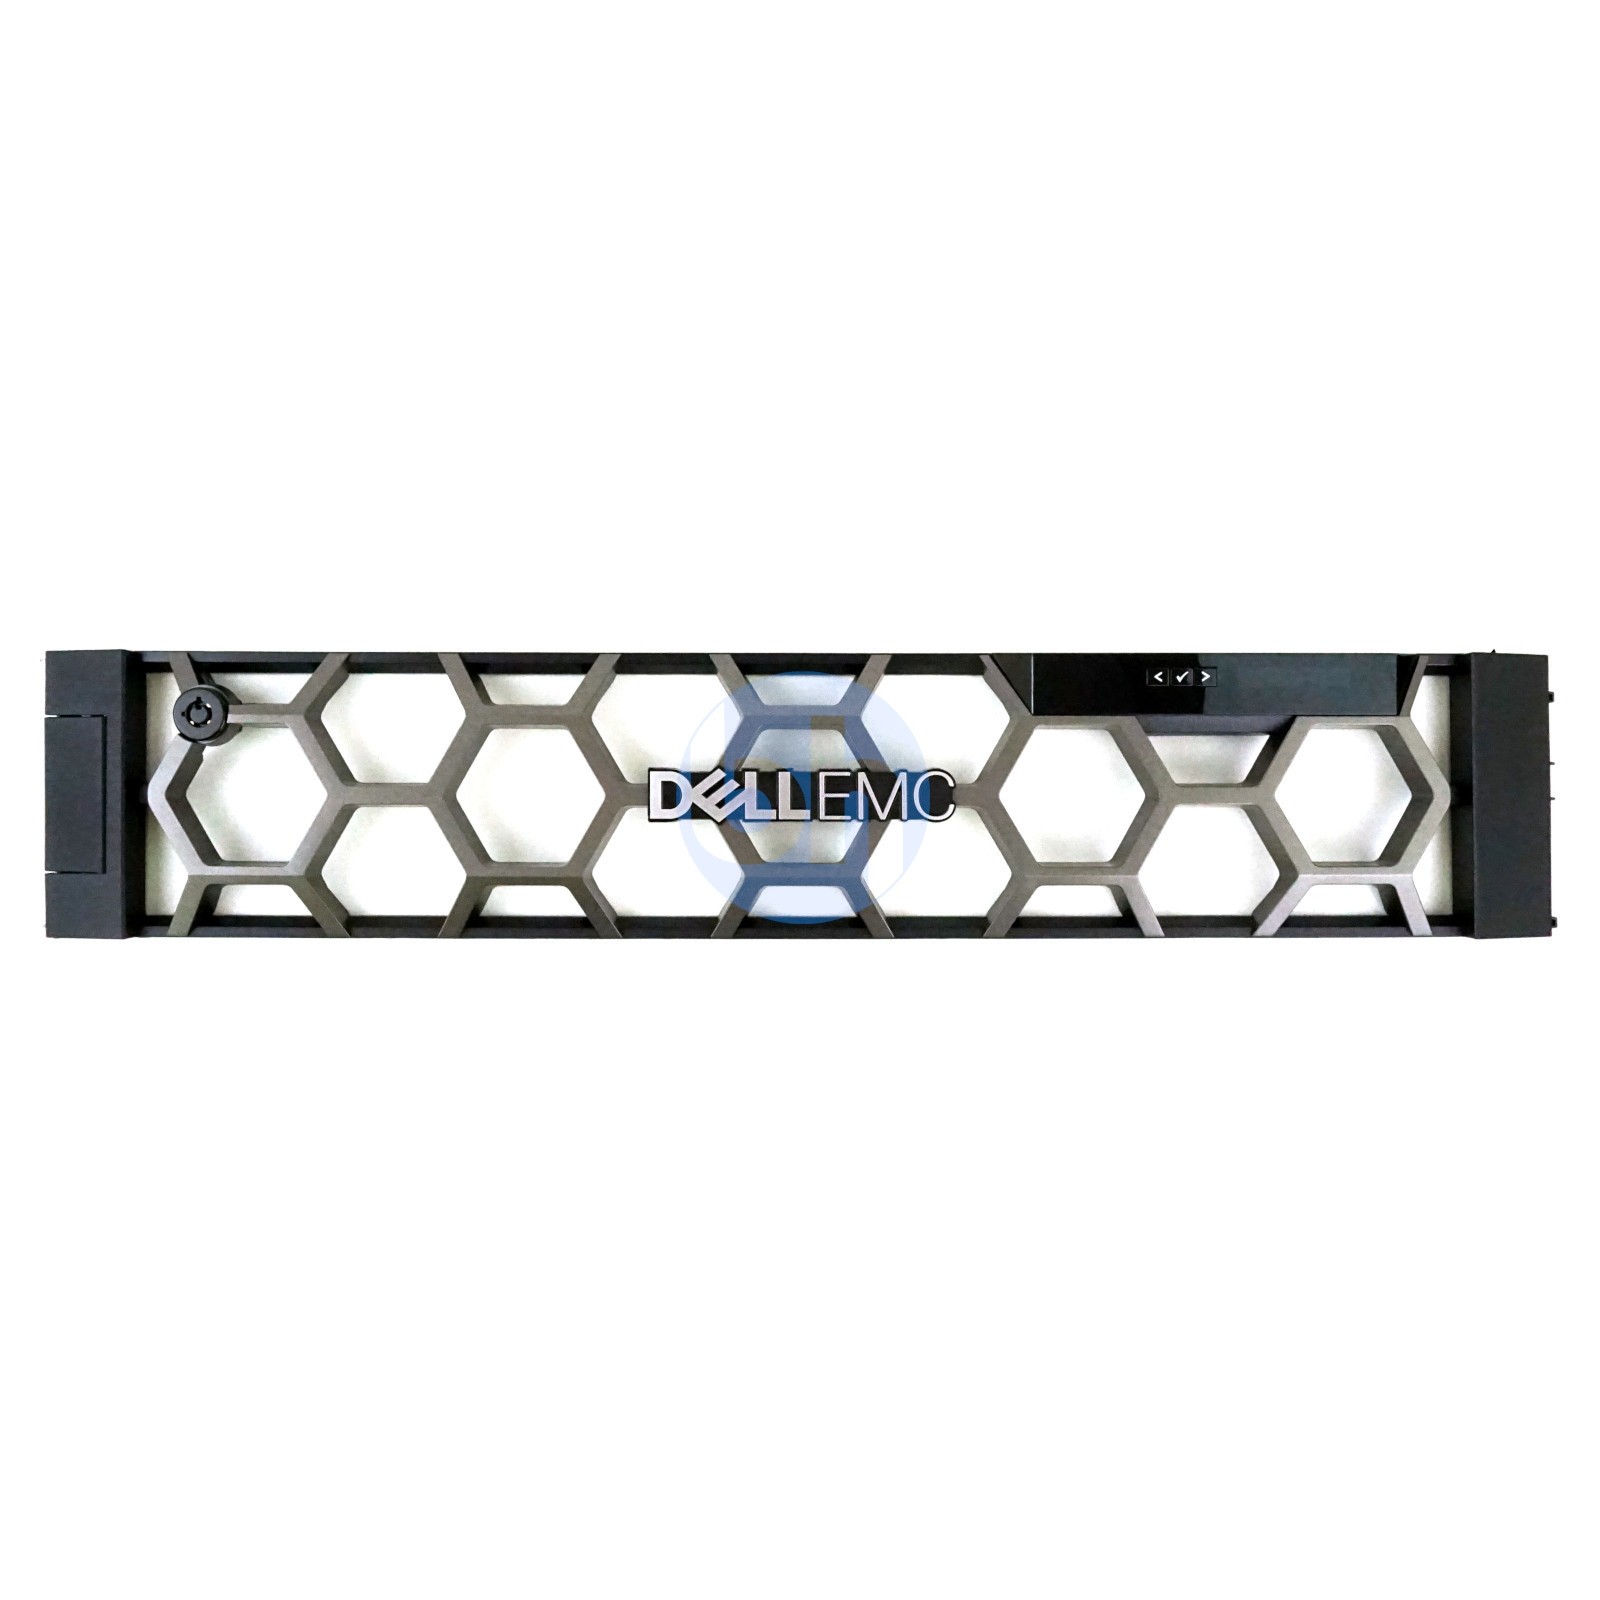 Dell EMC PowerEdge R540, R740, R740xd LCD Security Front Bezel